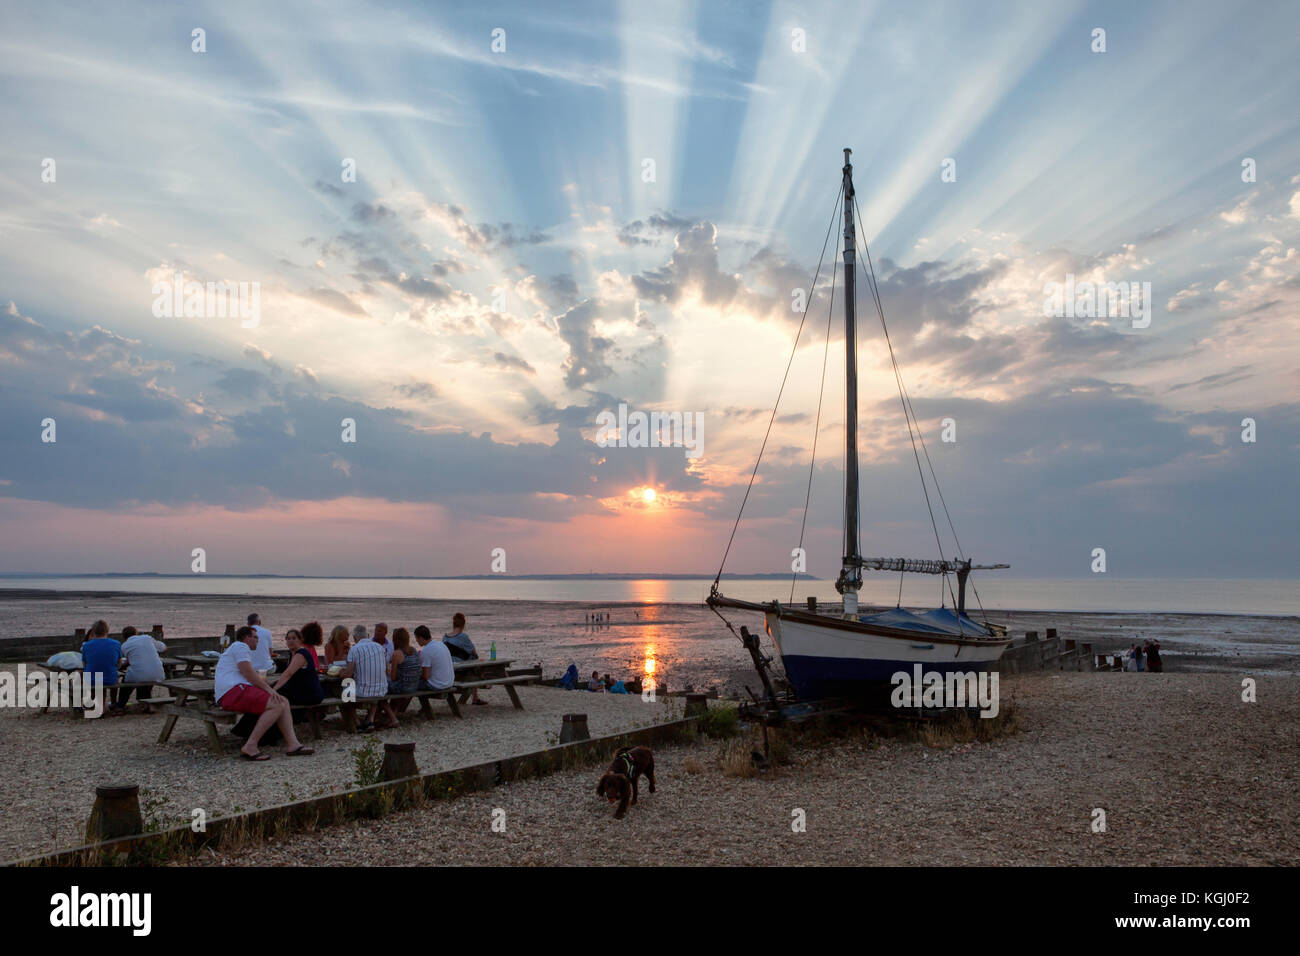 Dramatic crepuscular rays at sunset seen from West Beach, Whitstable, Kent, UK looking across to the Isle of Sheppey. Stock Photo